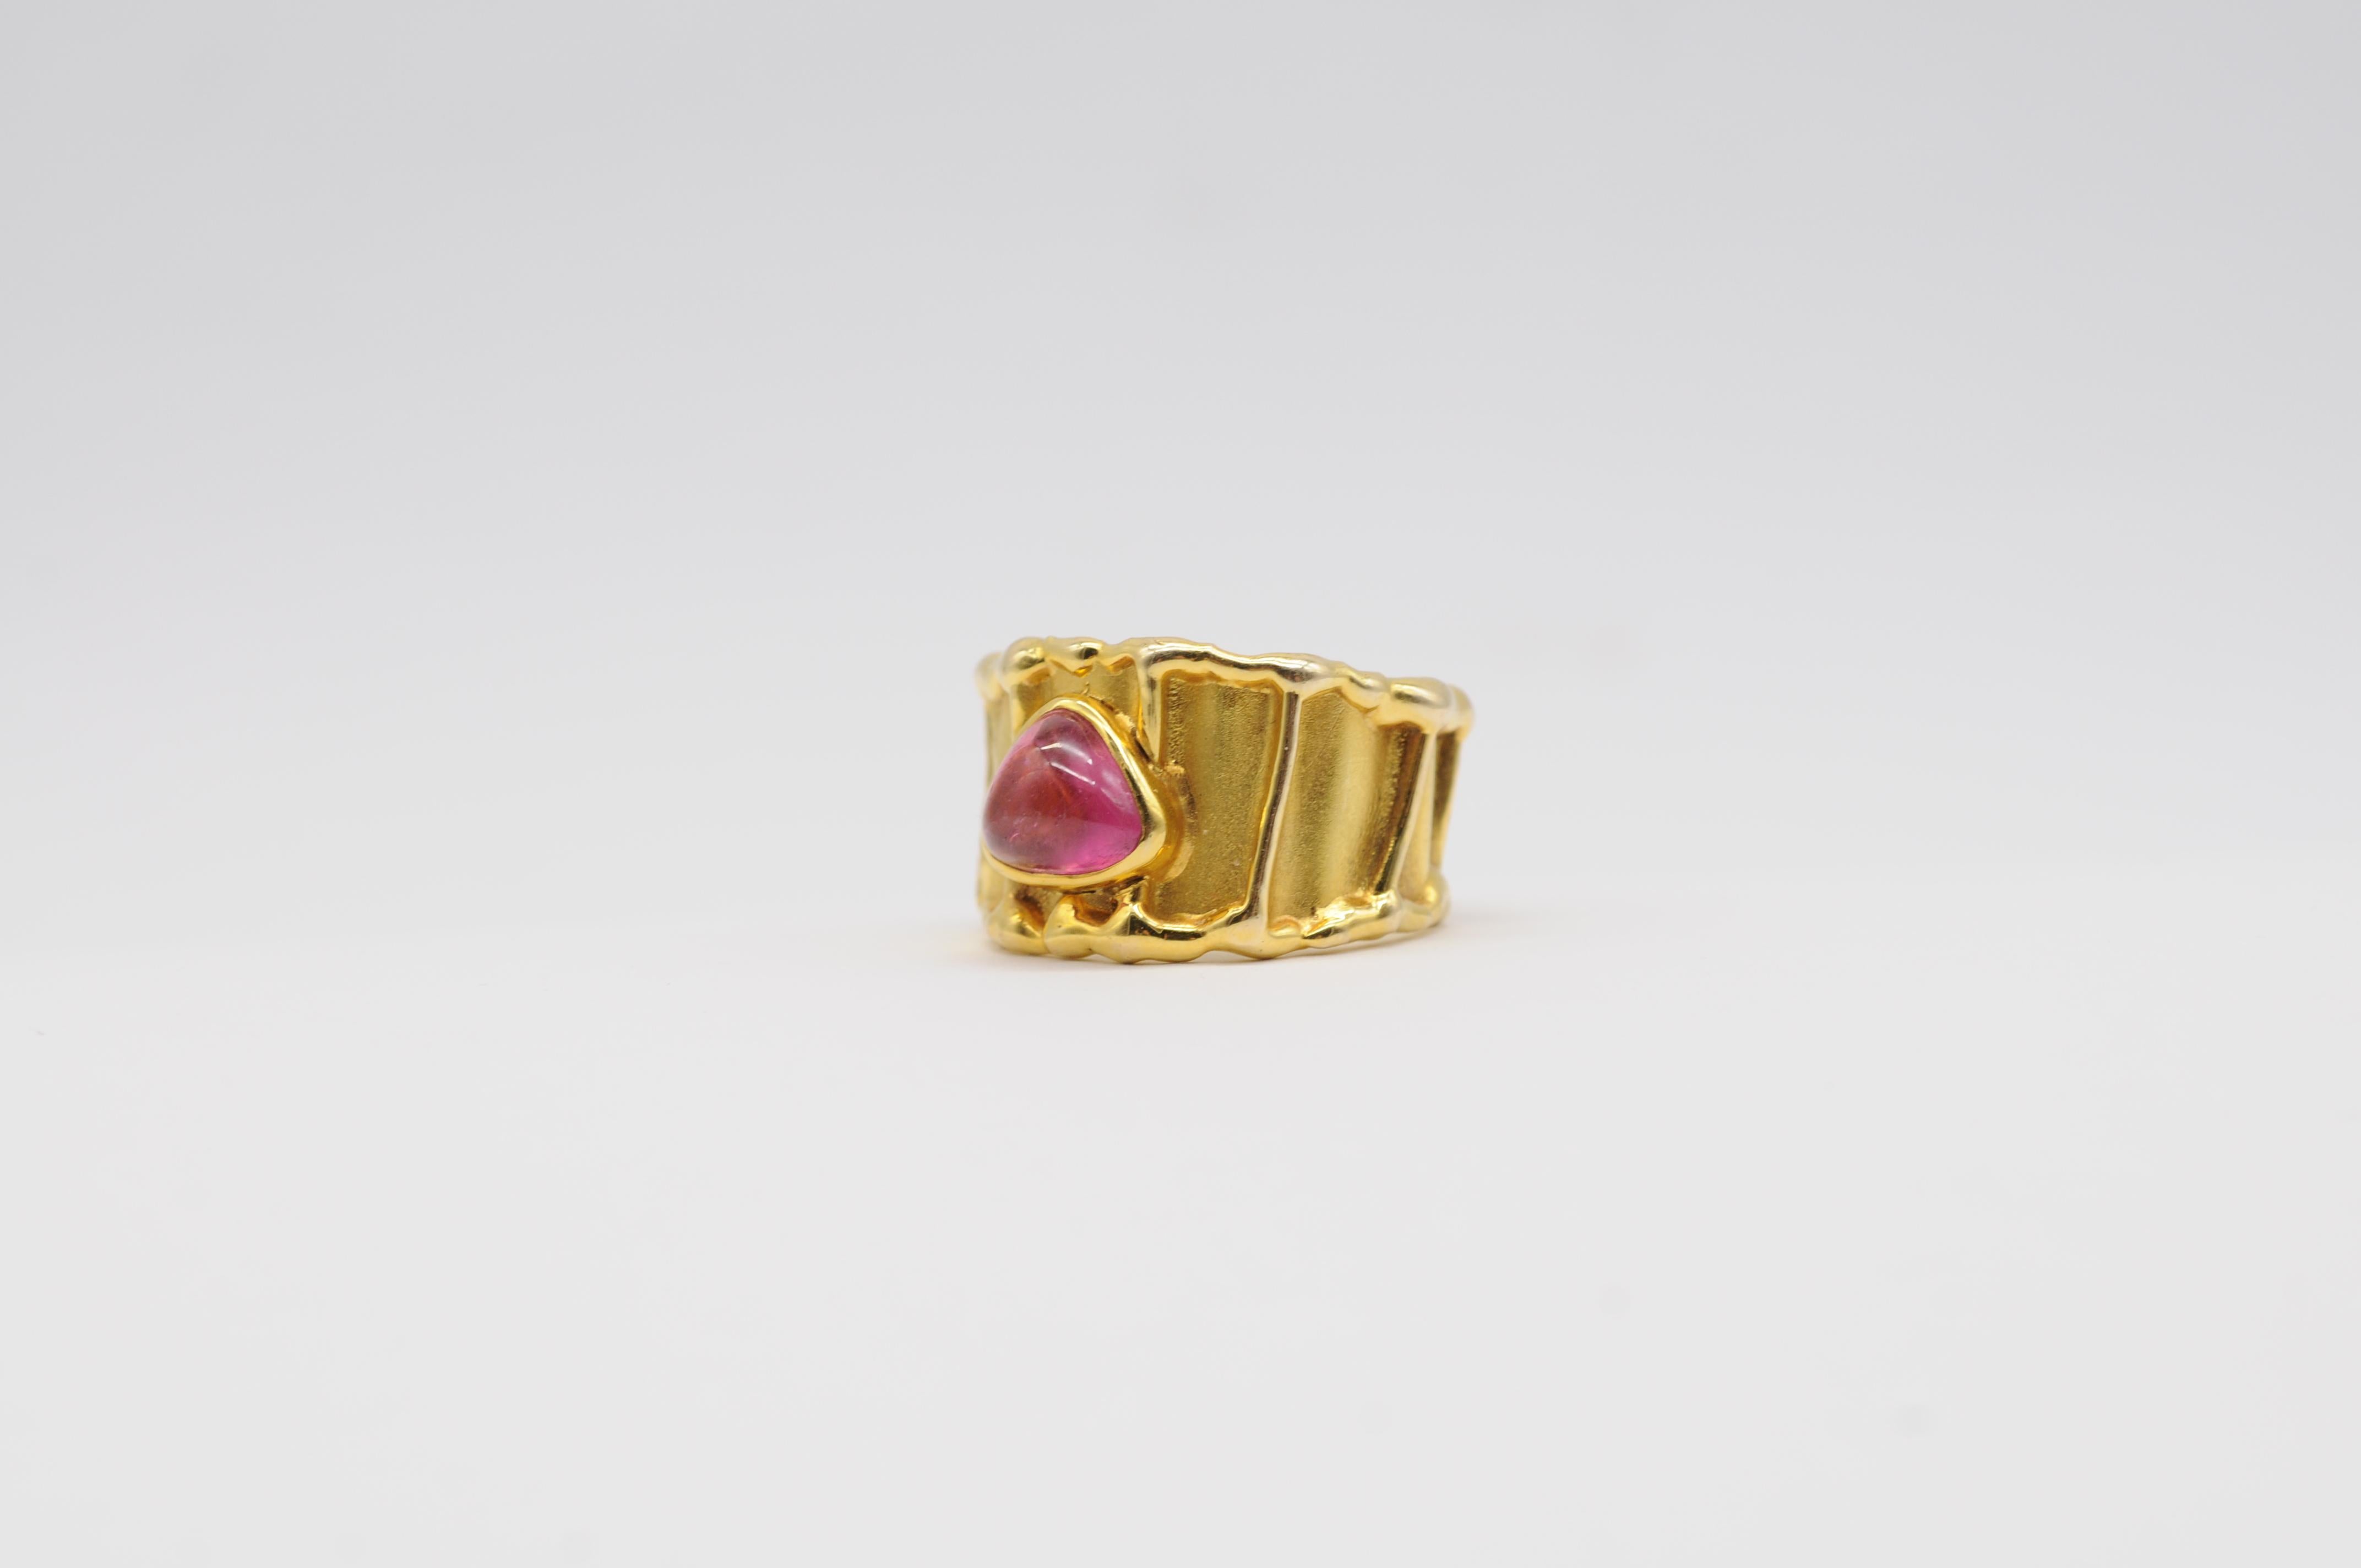 Majestic red Tourmaline ring in 14k yellow gold For Sale 3